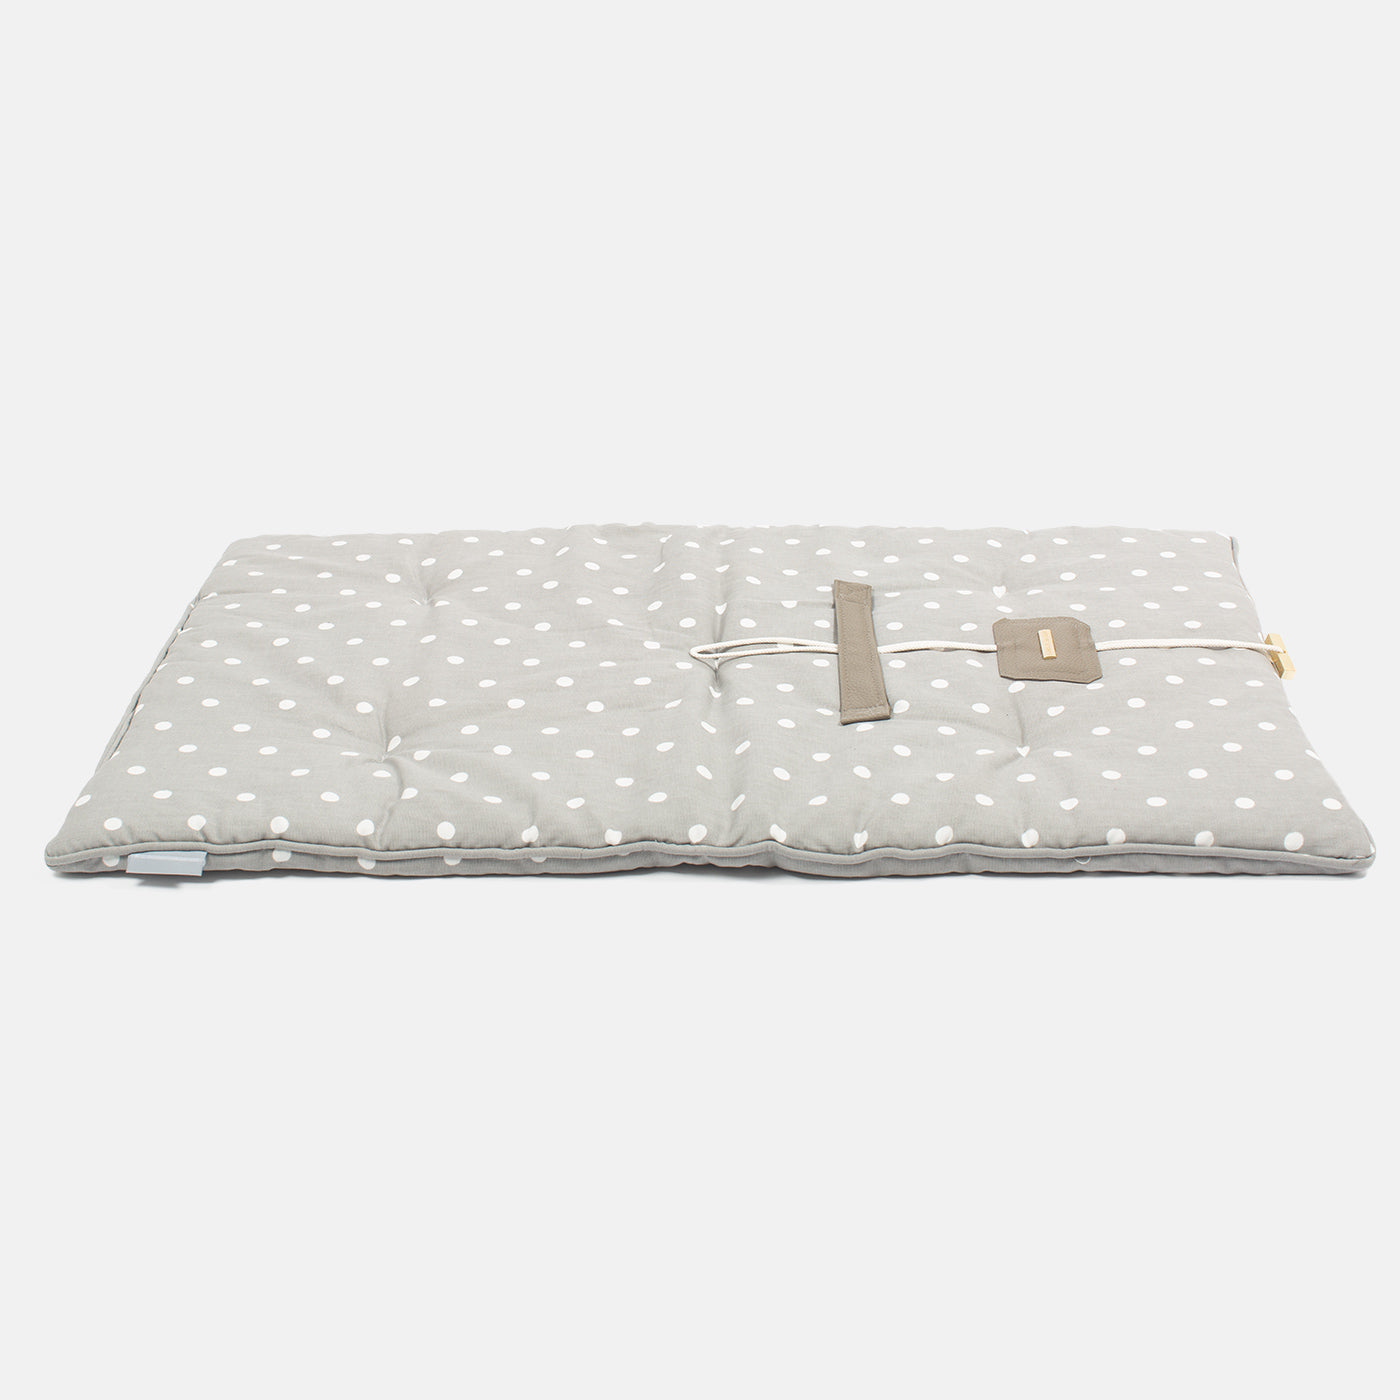 Embark on the perfect pet travel with our luxury Travel Mat in Grey Spot. Featuring a Carry handle for on the move once Rolled up for easy storage, can be used as a seat cover, boot mat or travel bed! Available now at Lords & Labradors